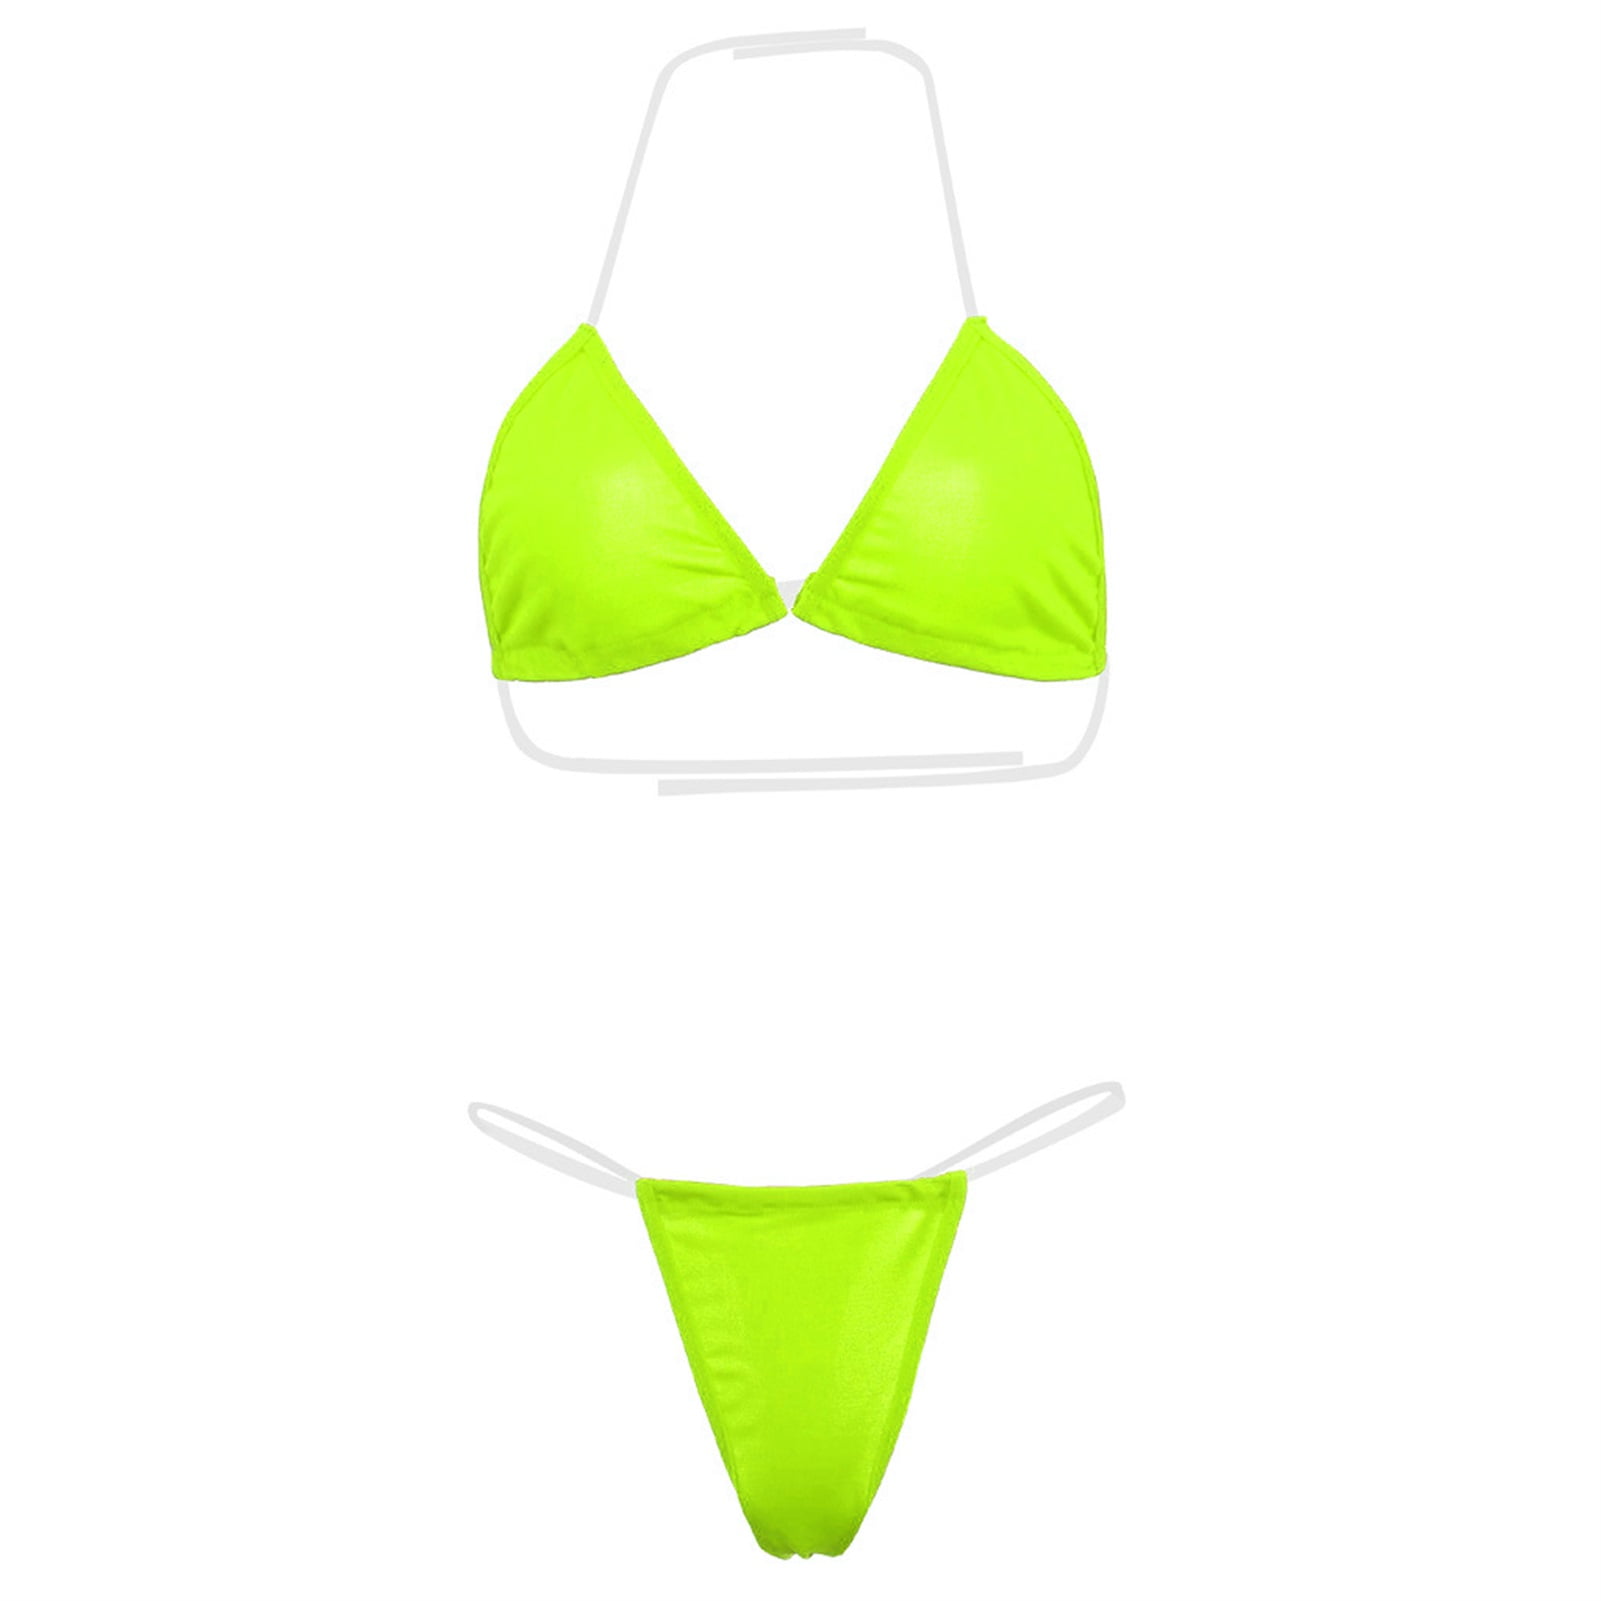 Womens Halter Bikini Sets 2022 With Push Up Bra And High Waist Hollow  Triangle Panty Perfect For Summer Beach Swimwear From Peanutoil, $14.75